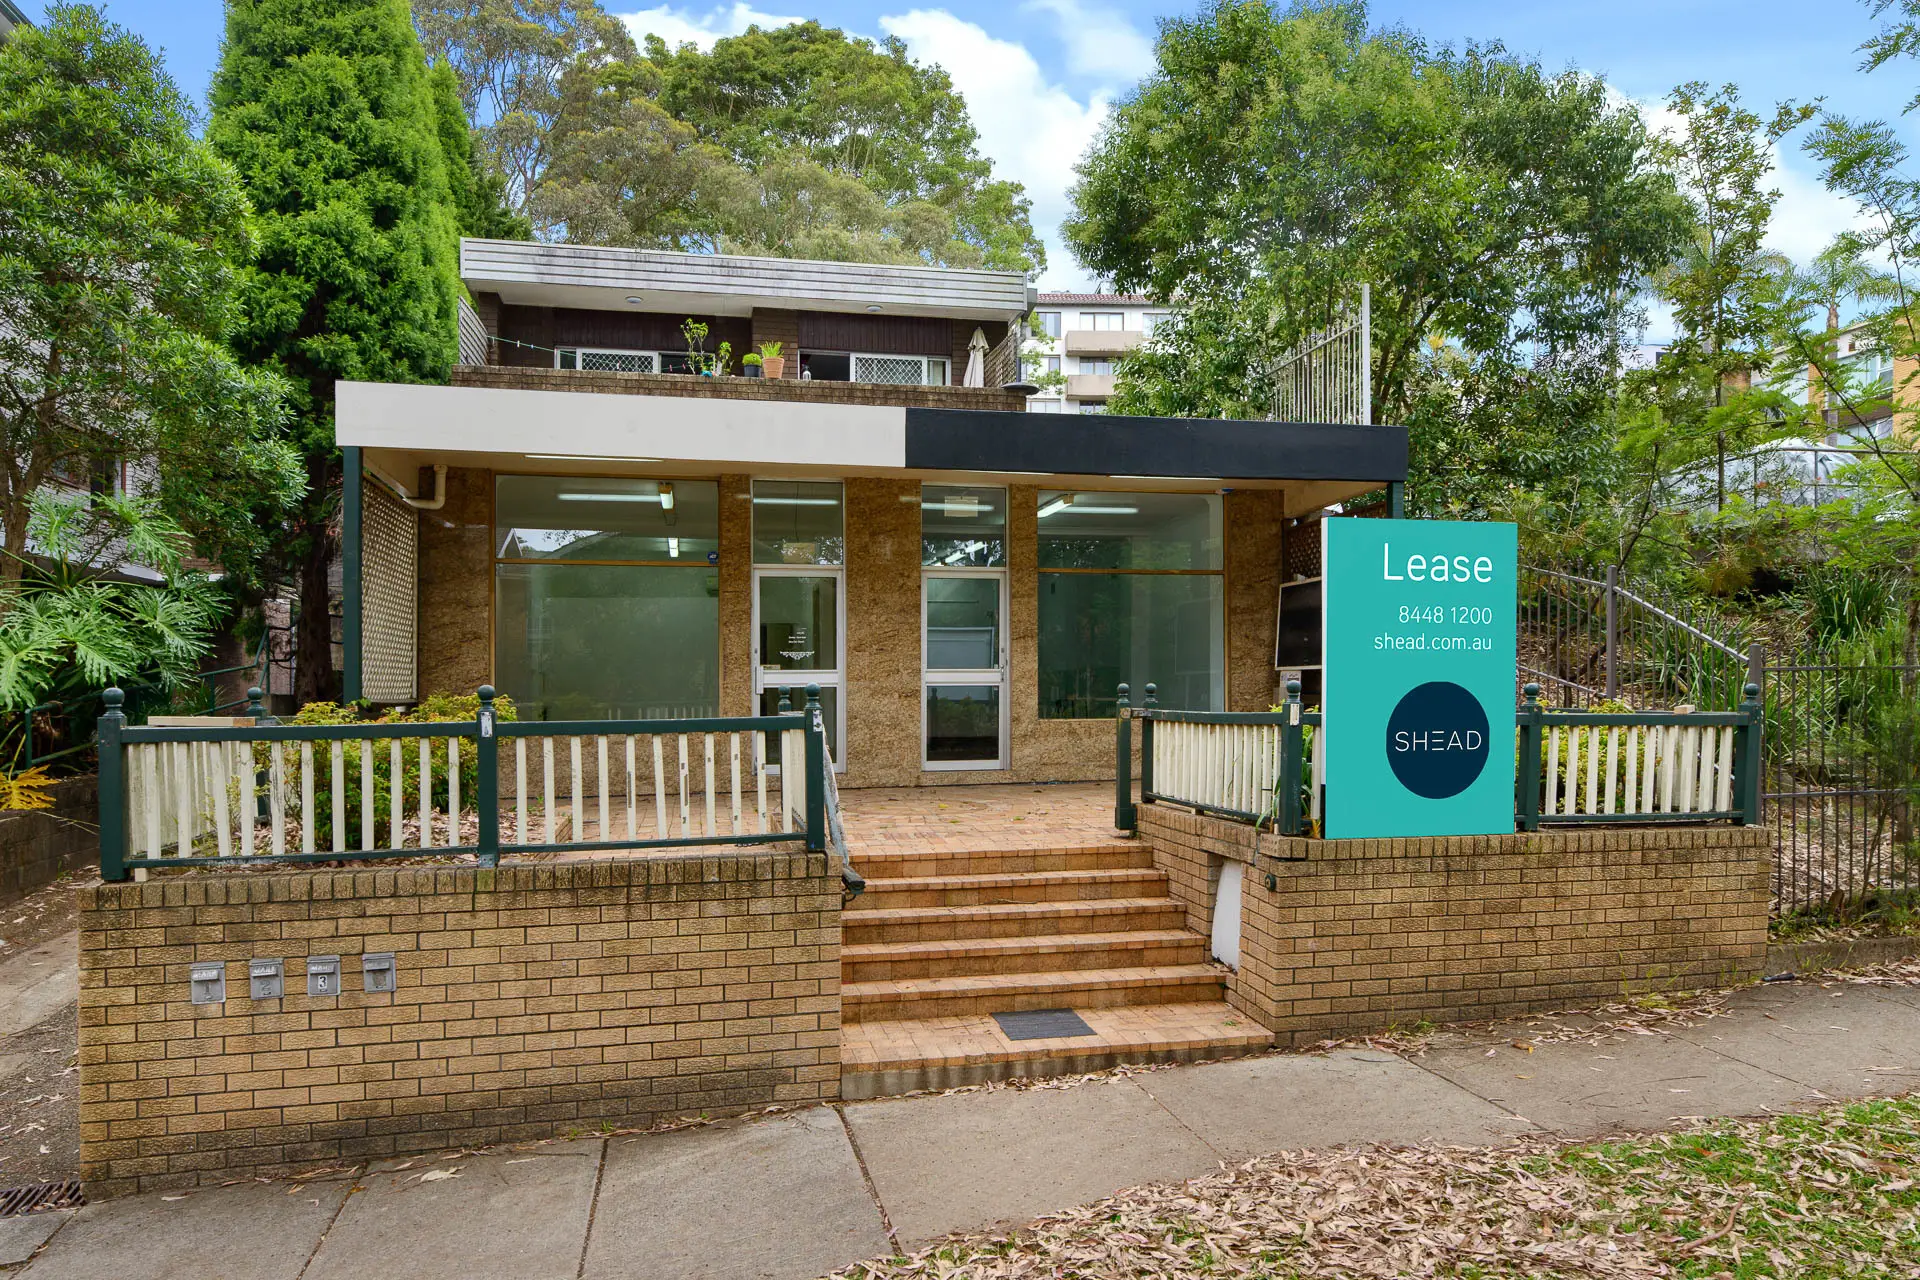 Shops 1&2/72 Helen Street, Lane Cove For Lease by Shead Property - image 1